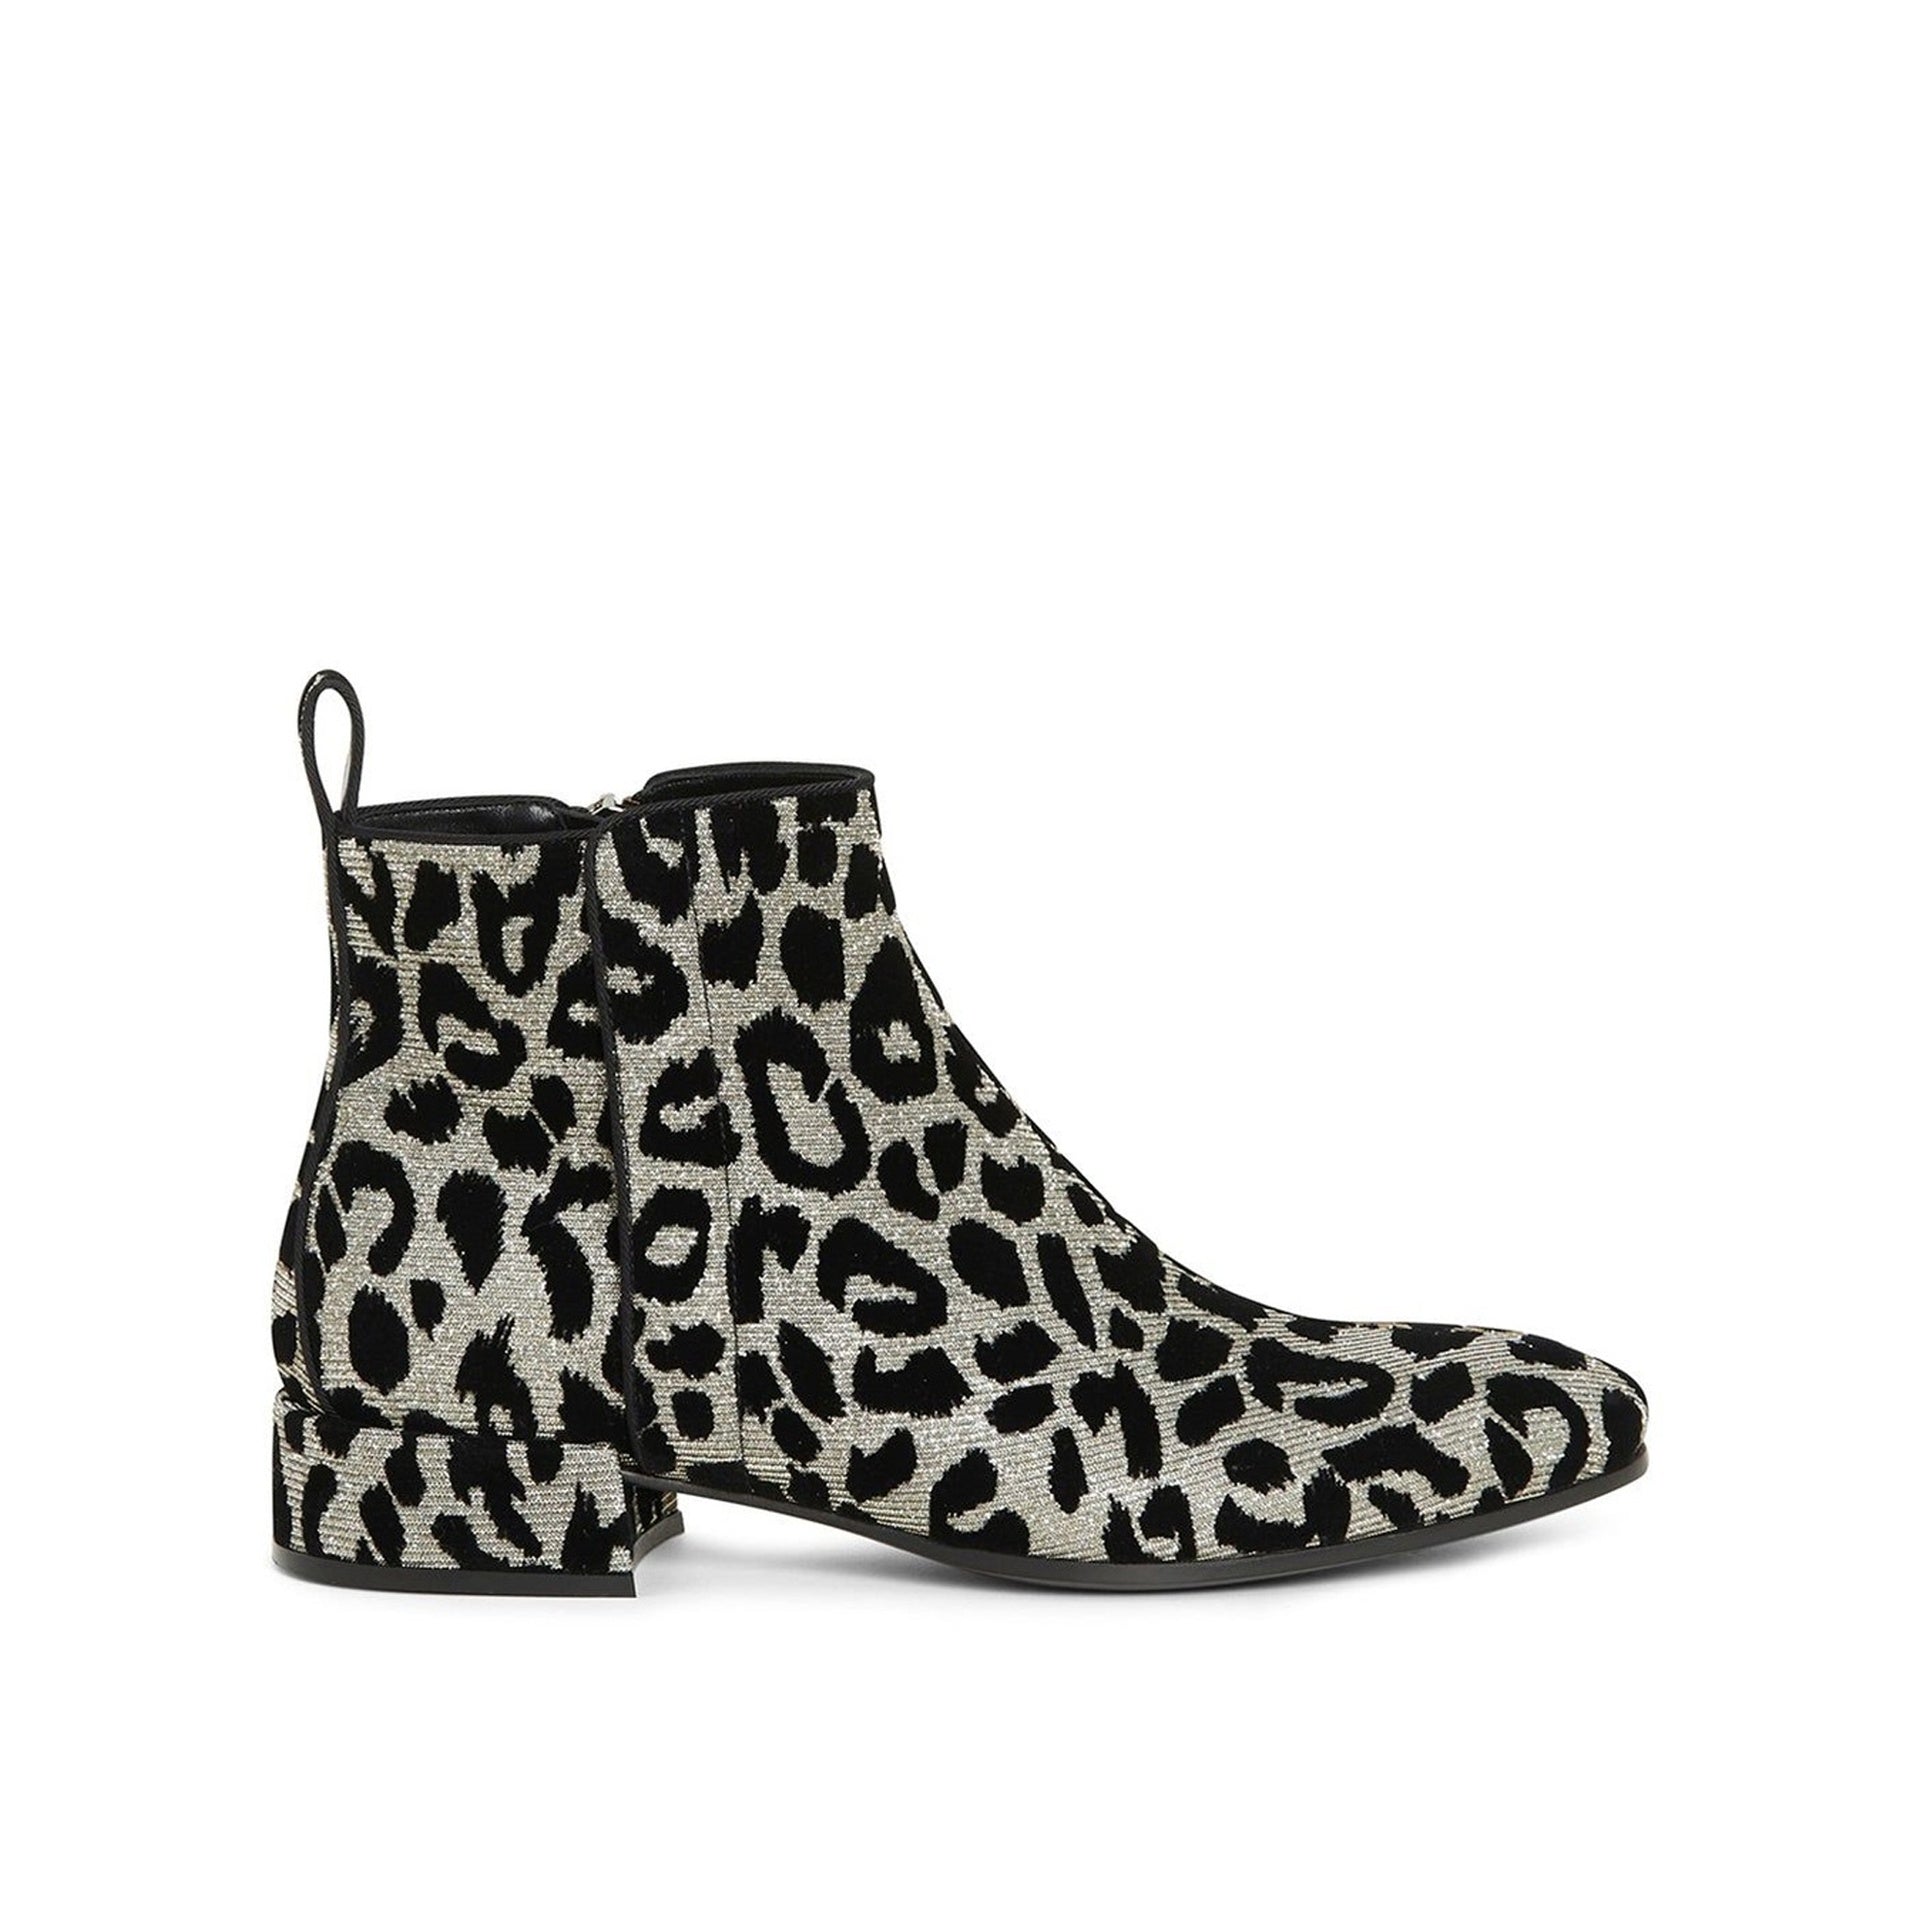 Dolce & Gabbana Leopard Ankle Boots